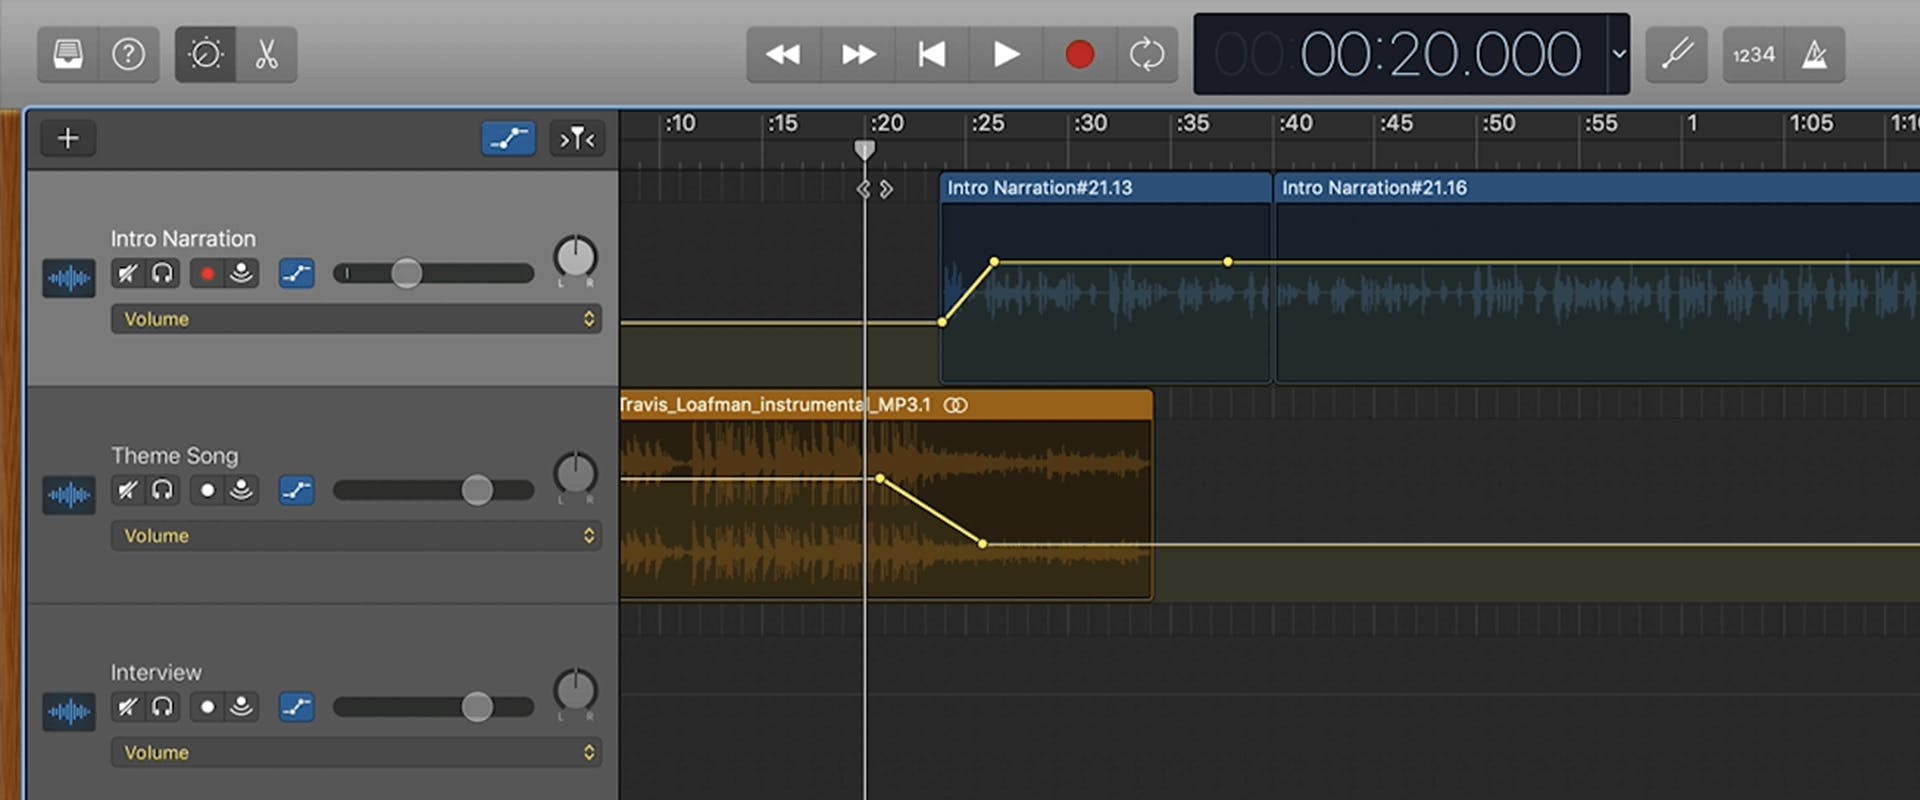 Automation feature applied to clips in Garageband workspace